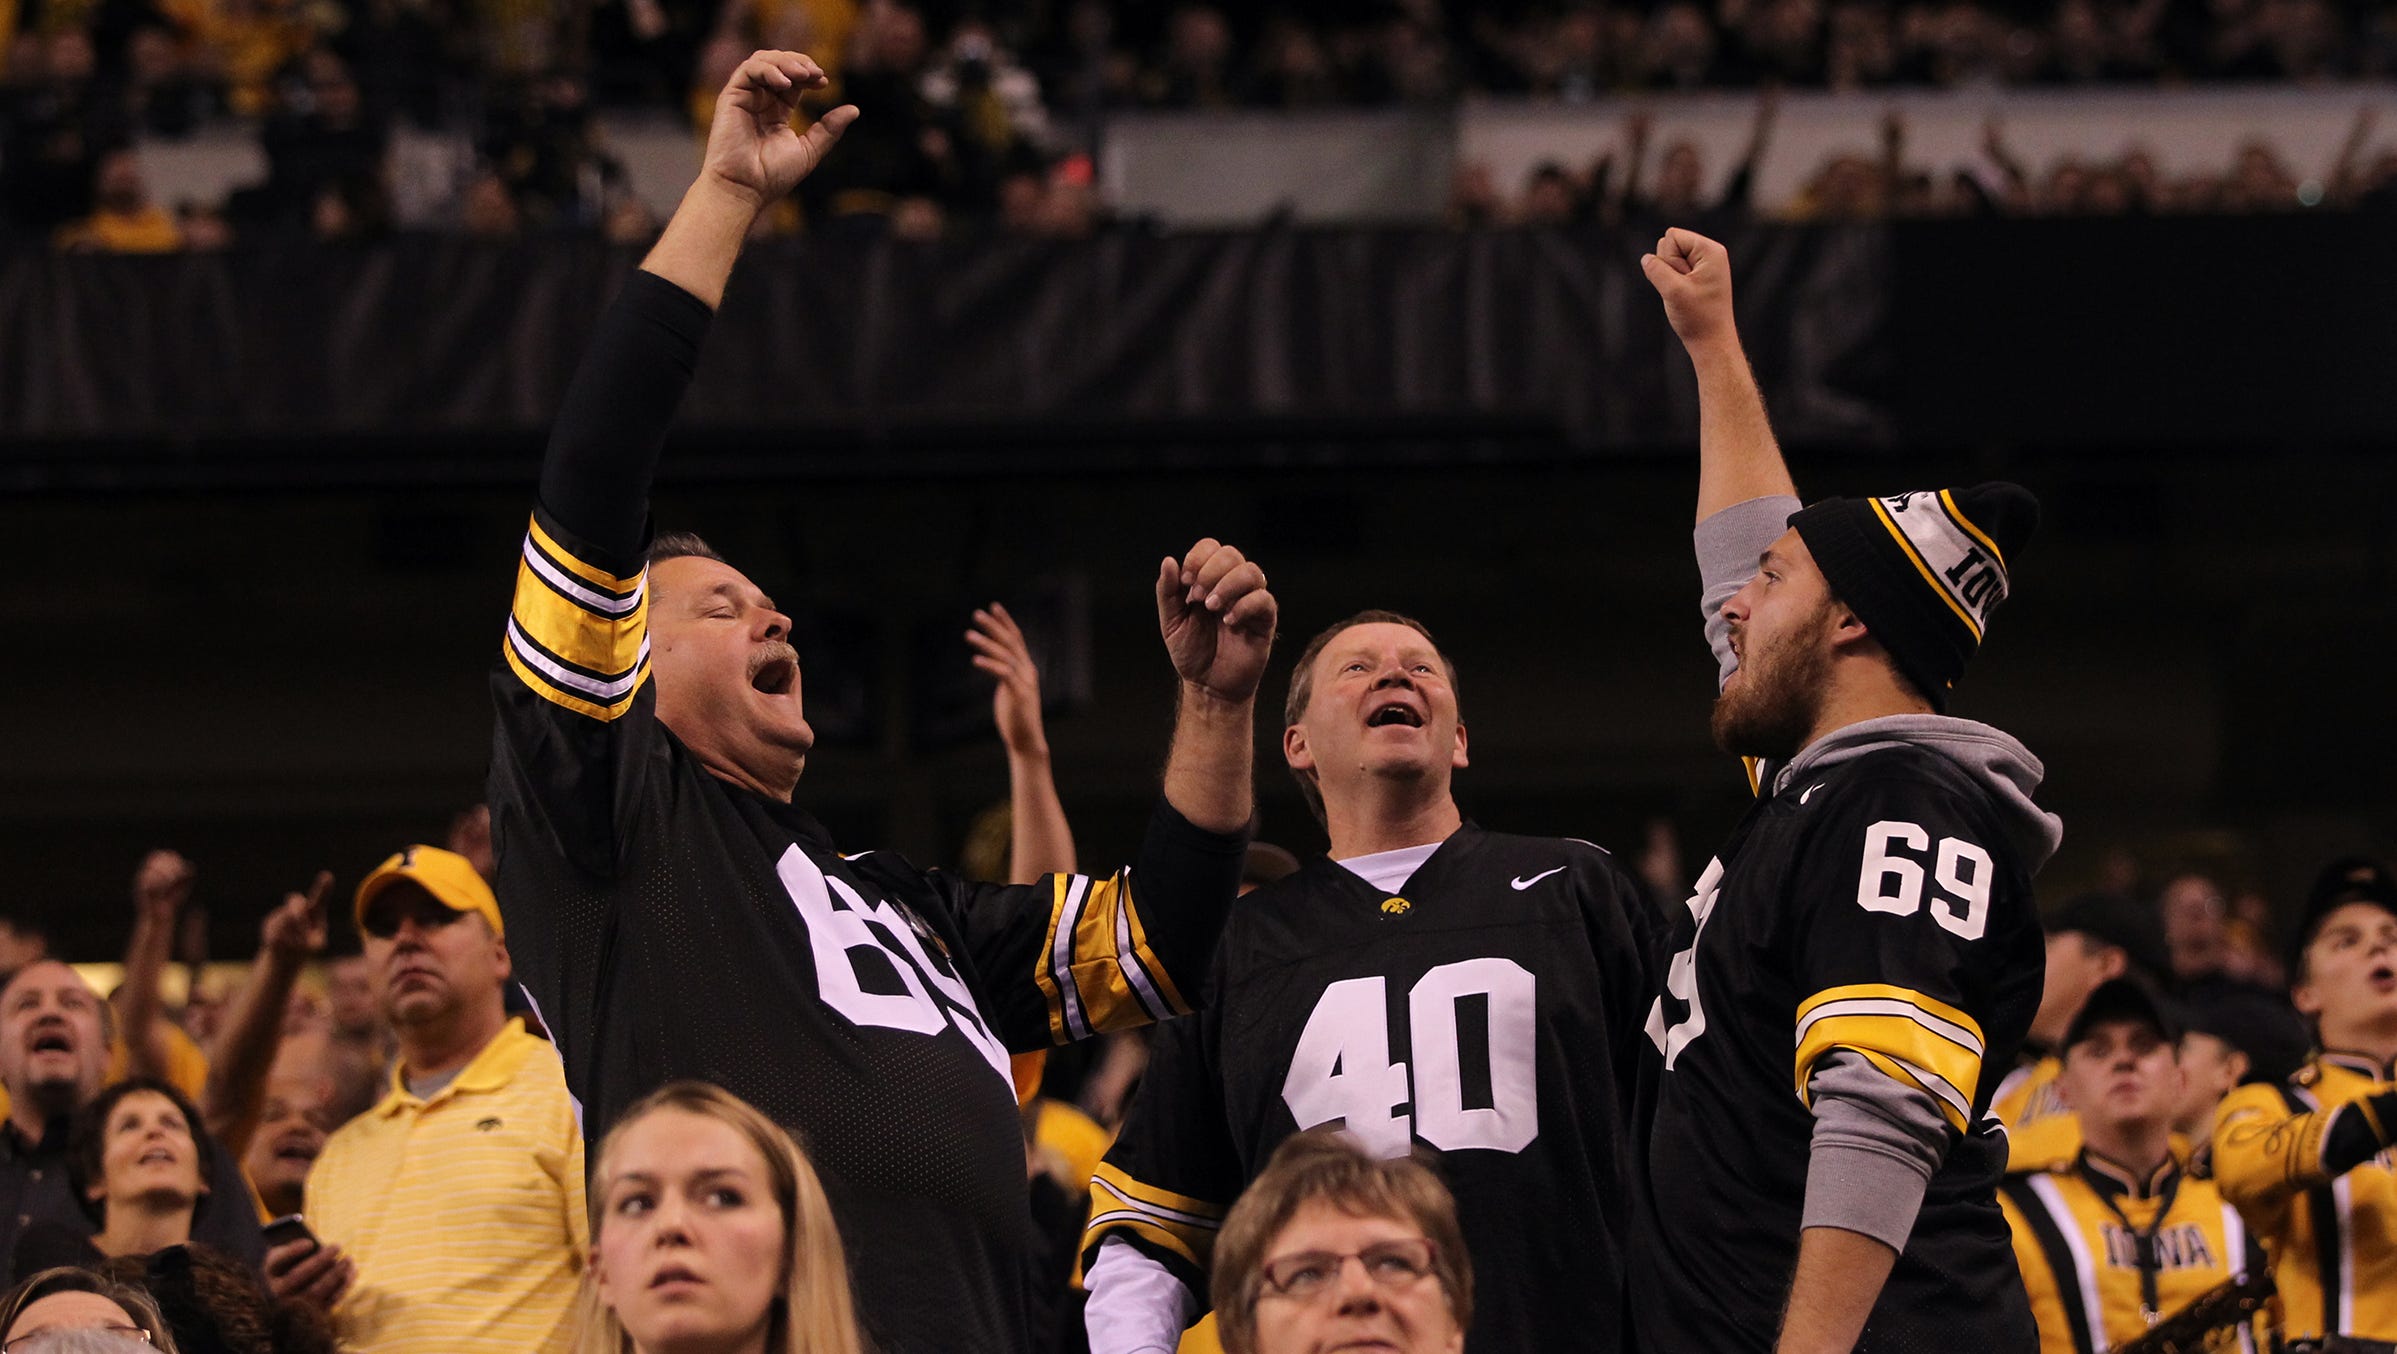 Iowa fans celebrate a reversed call during the Hawkeyes' Big Ten Championship game against Michigan State at Lucas Oil Stadium in Indianapolis, Ind. on Saturday, Dec. 5, 2015.